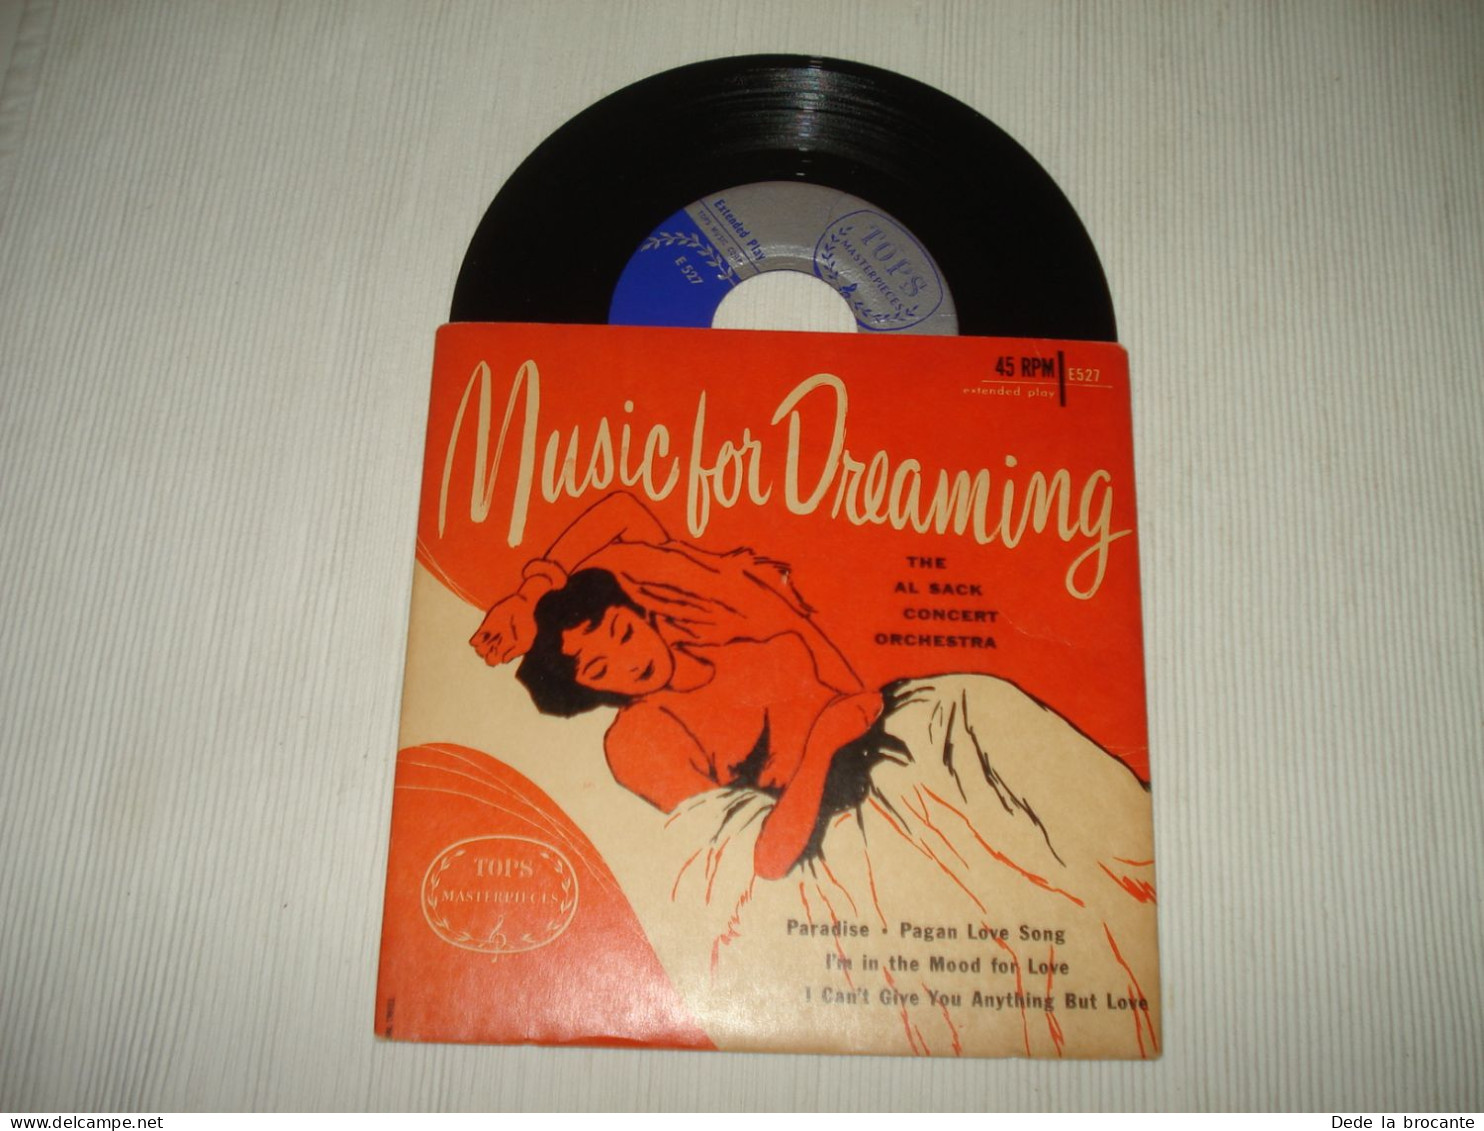 B13 / Al Sack His Concert Orch.  Music For Dreaming - EP – E 527 - US 1957 NM/NM - Formatos Especiales